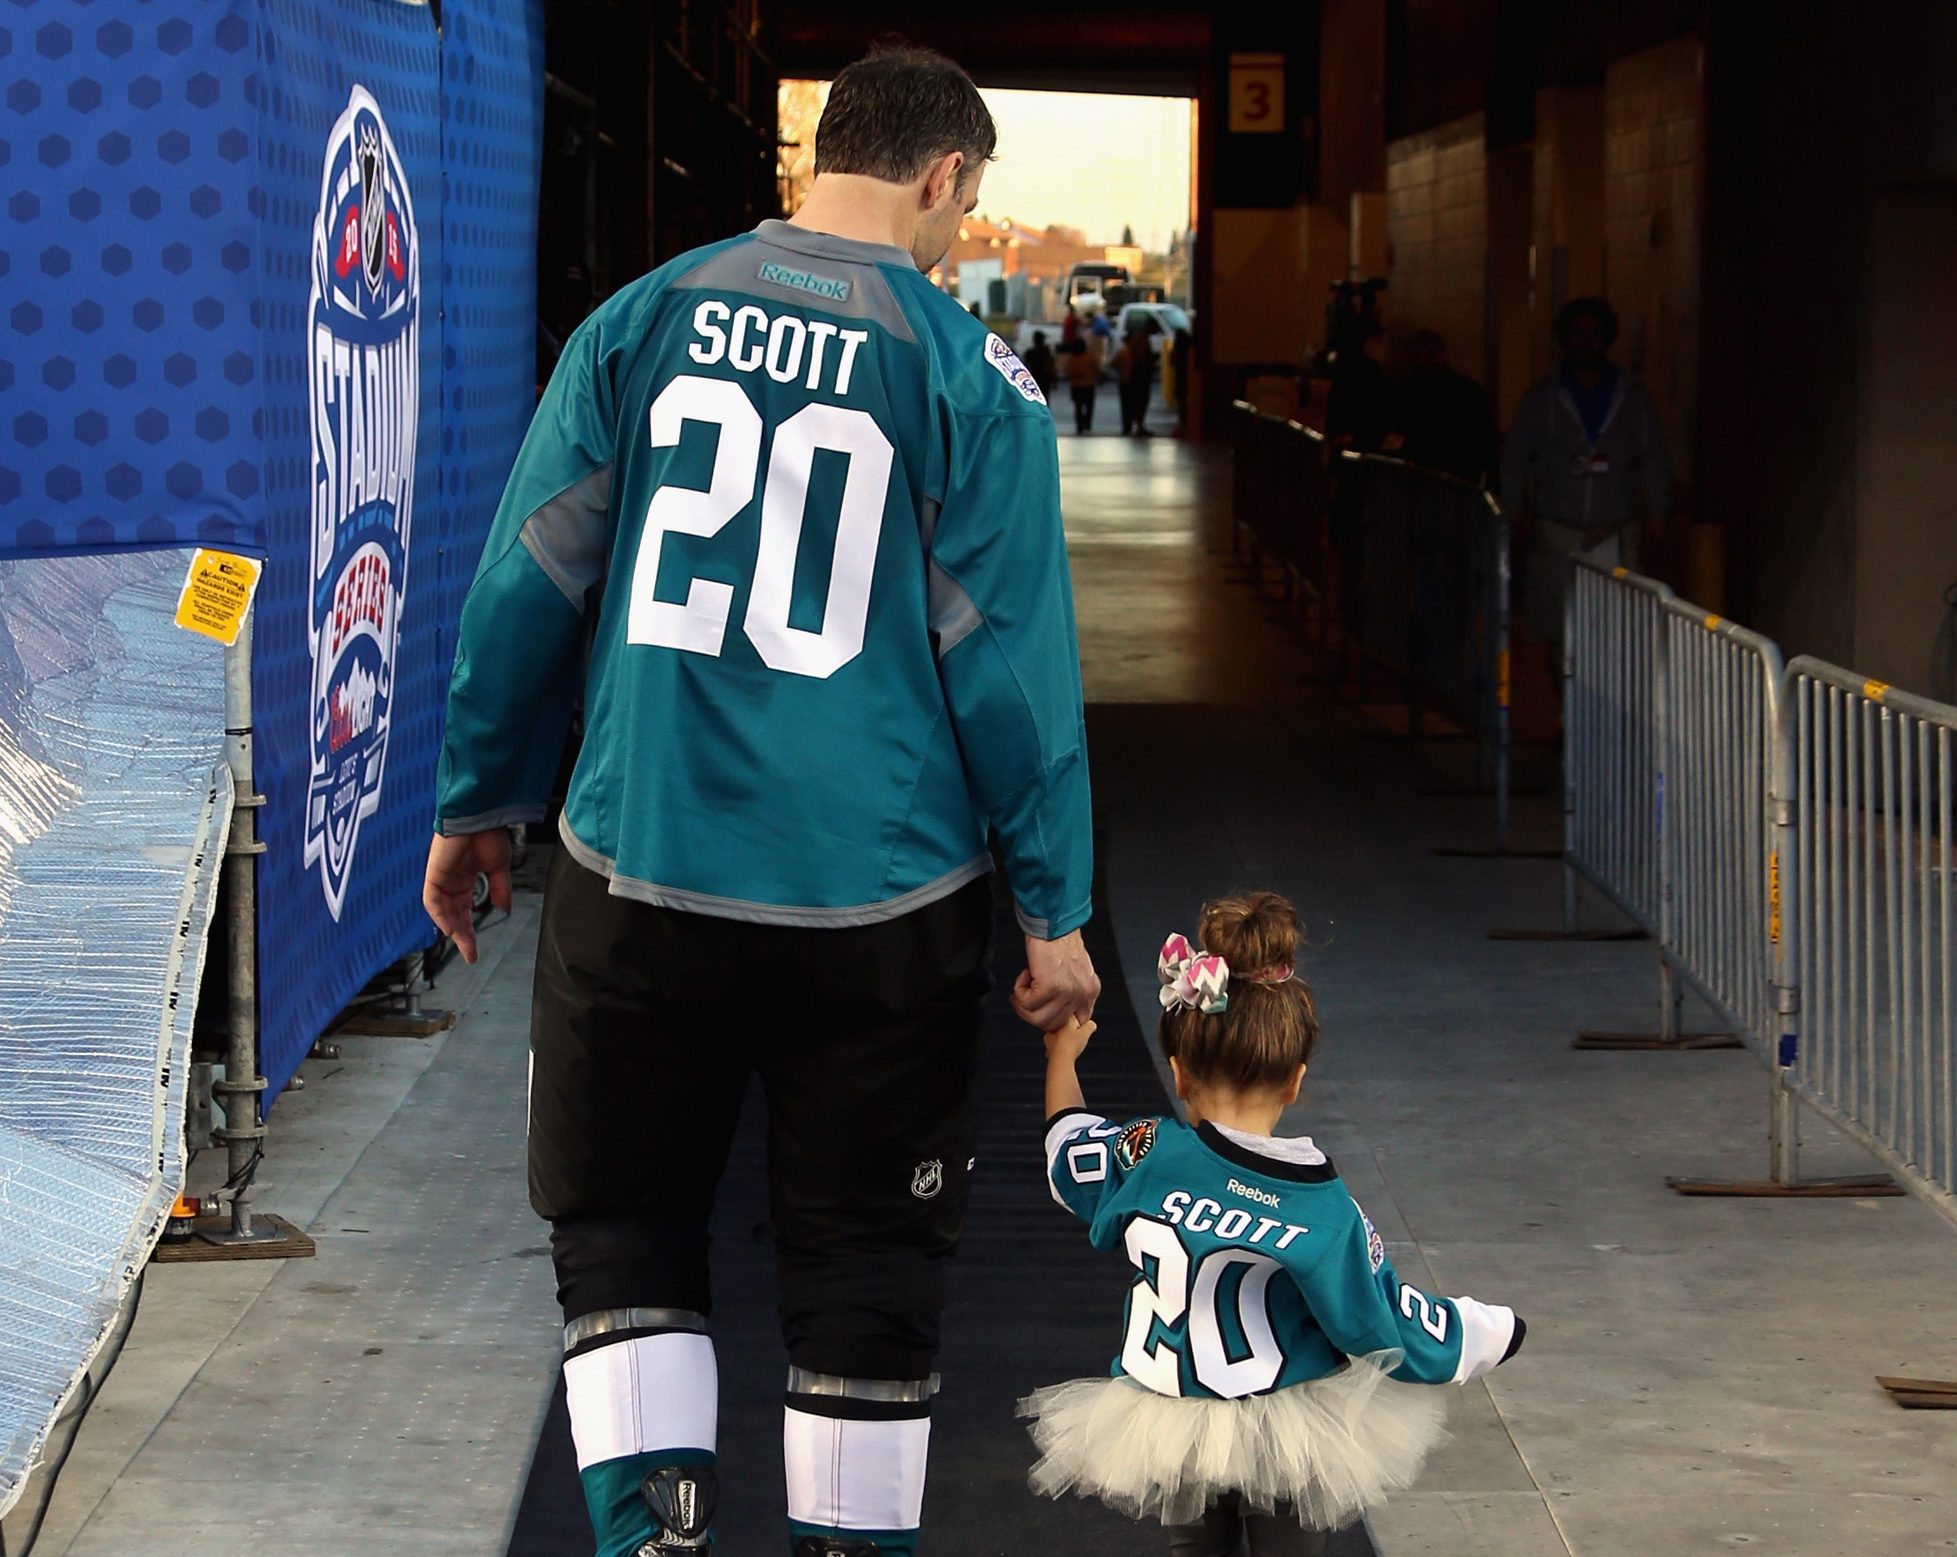 Misnomer on Skates: John Scott, N.H.L. All-Star, Is Neither in N.H.L. Nor a  Star - The New York Times